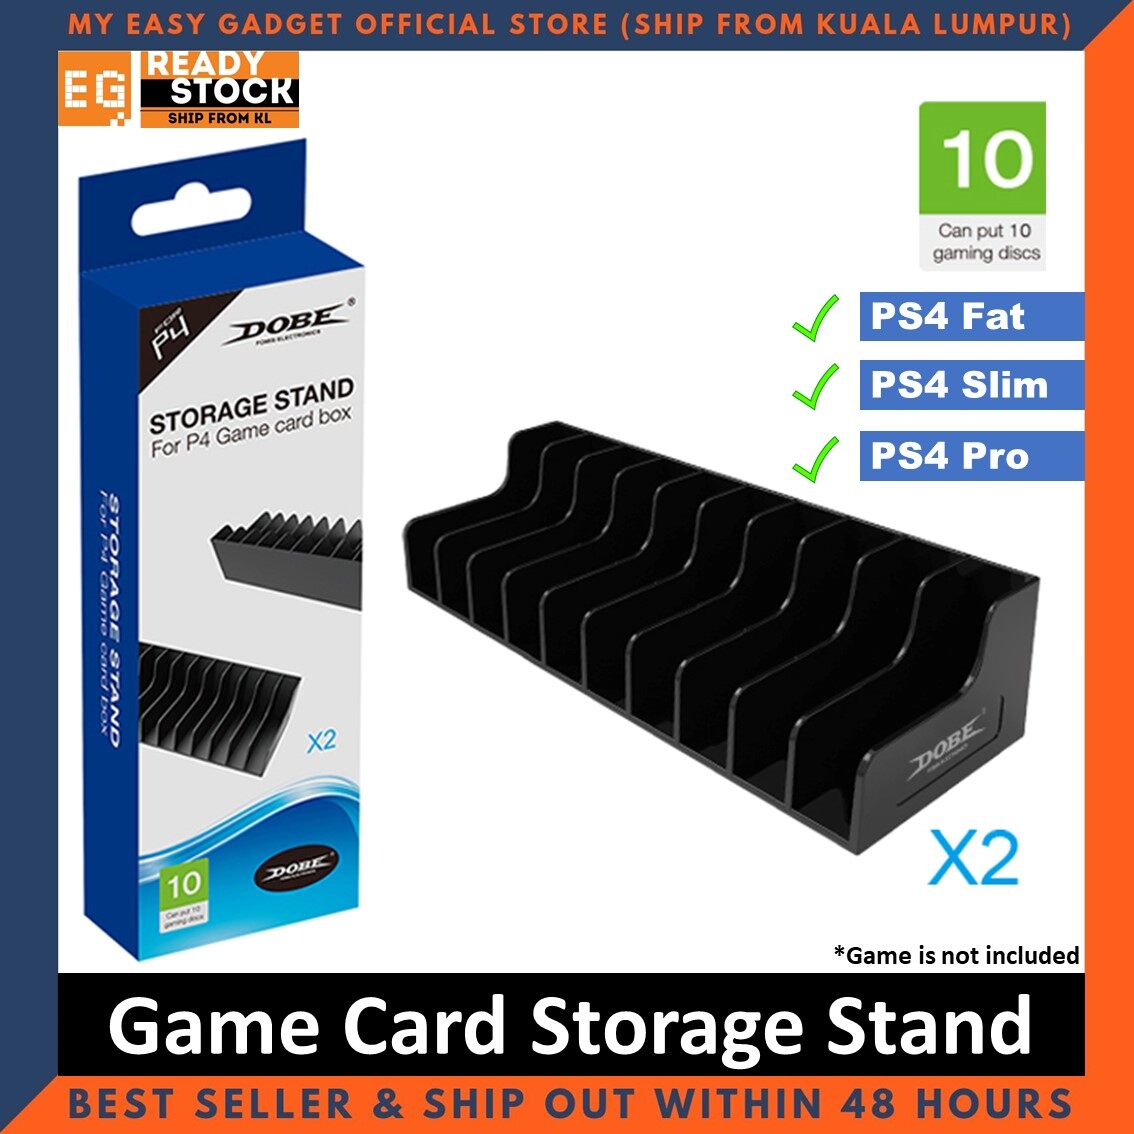 DOBE PS4 Slim PS4 Pro PS4 Fat Game Card Disc Blueray Box Storage Stand x 2pcs in One box TP4-1813